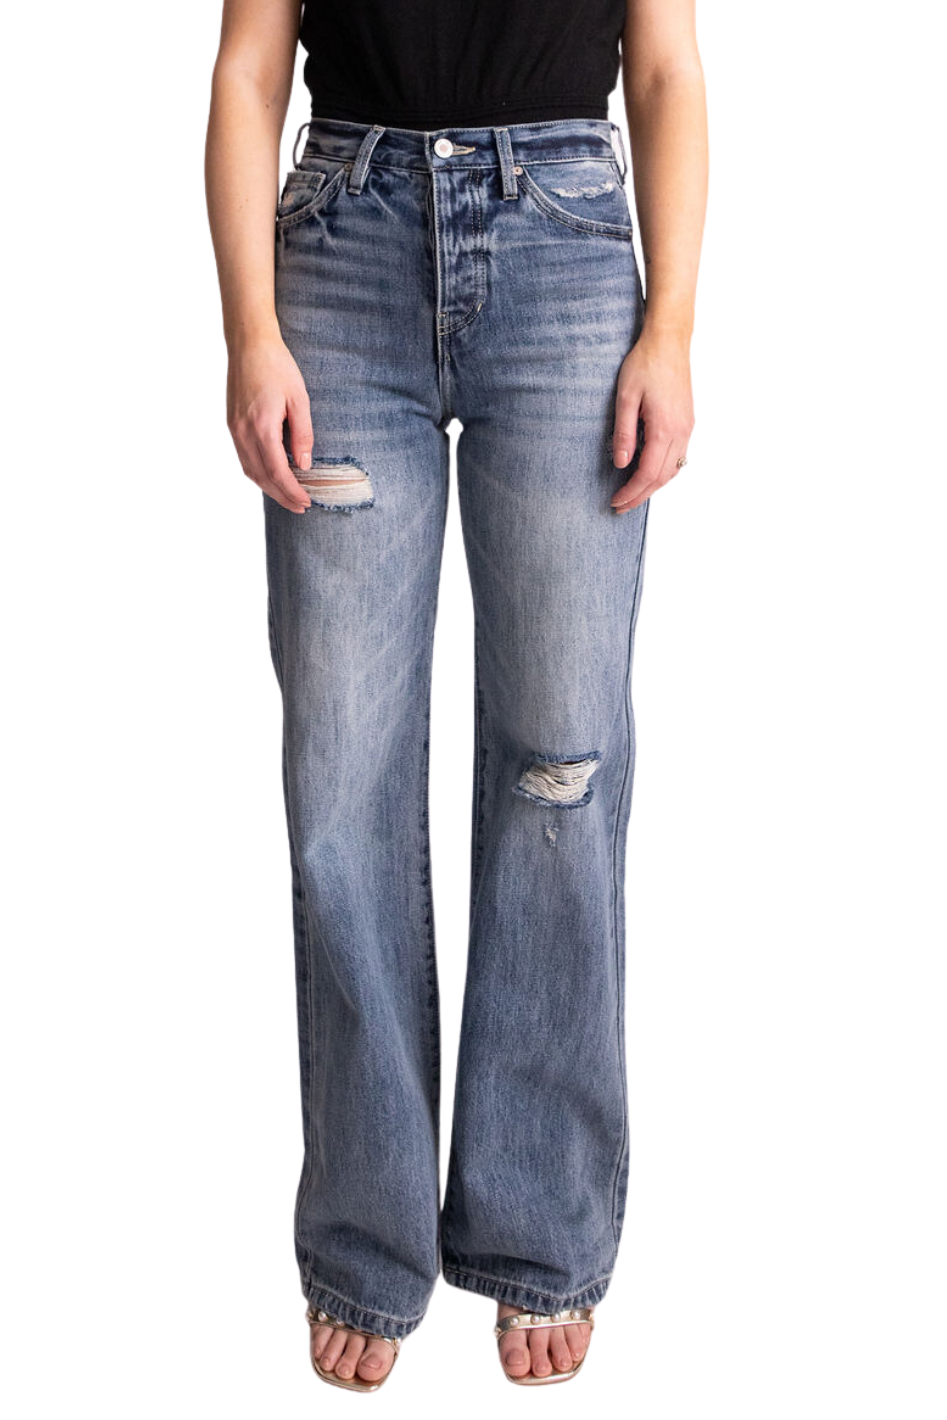 Emma Ultra HR 90's Distressed Flare Jean - Expressive Collective CO.